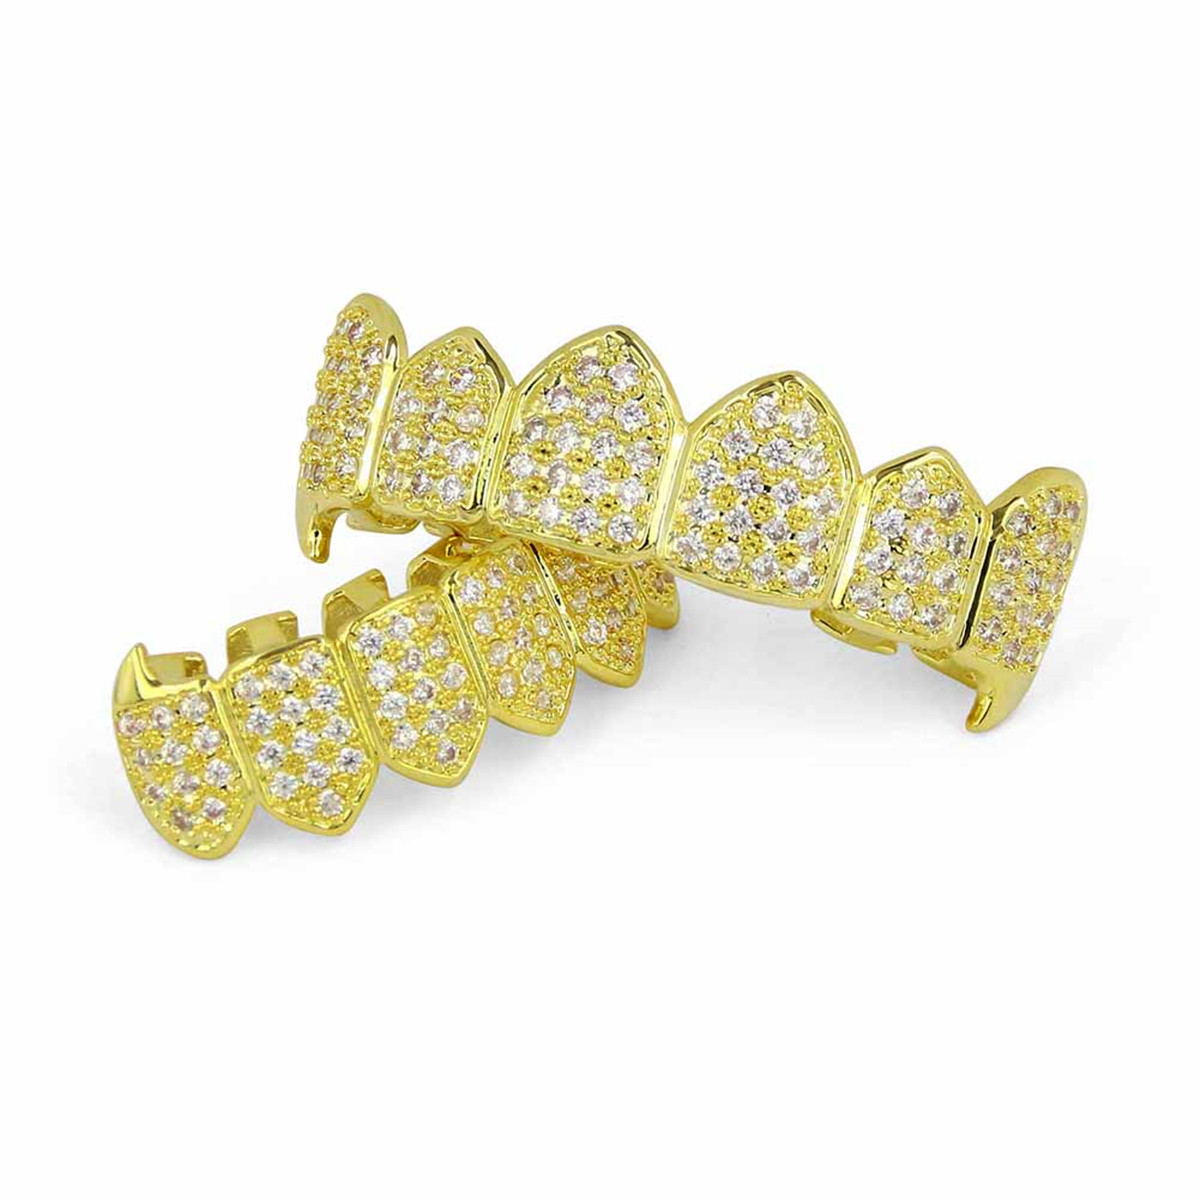 Gold-Plated-Glittering-Diamonds-Tooth-Polisher-Cap-Bottom-Mouth-1657887-4